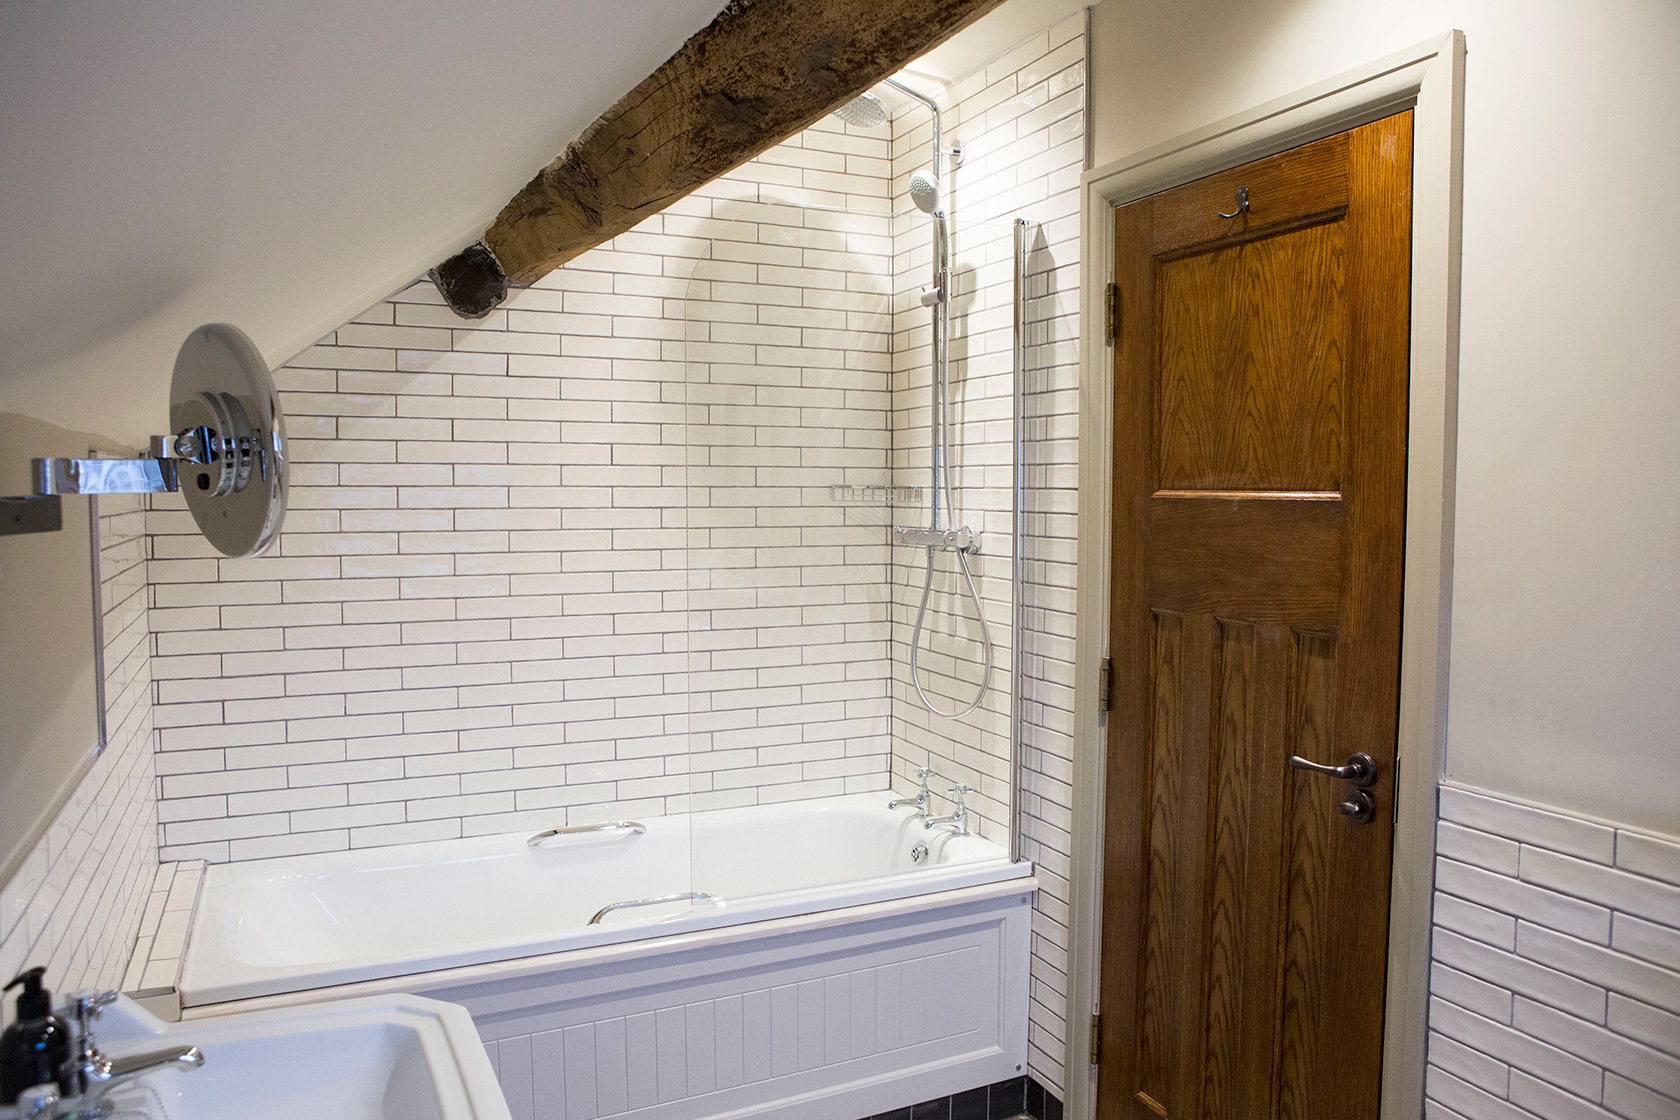 Newly-refurbished ensuites come as standard with all premium rooms at the Legh Arms